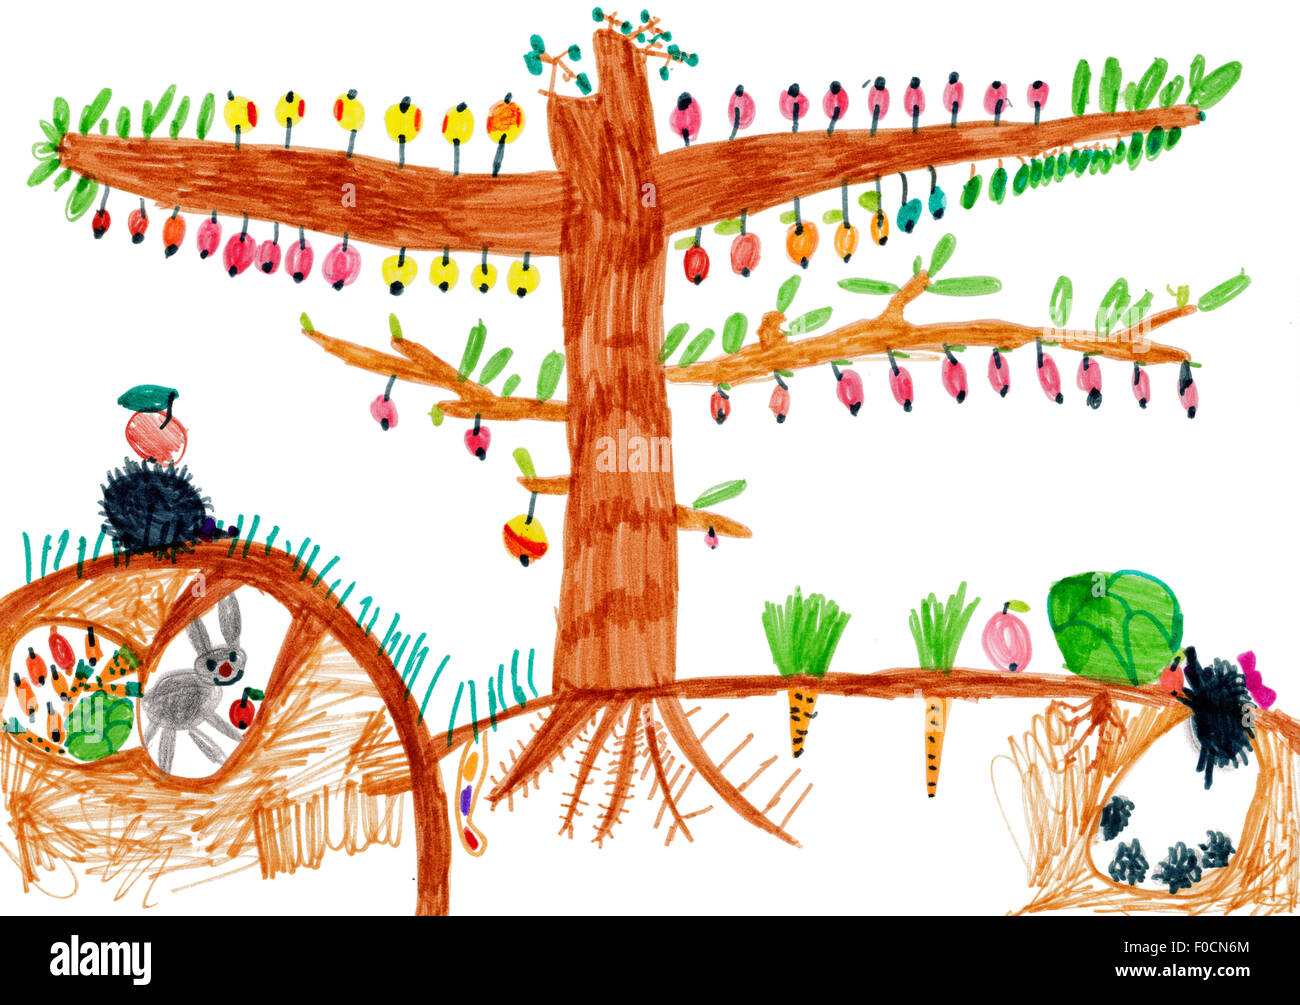 Children S Drawing Apple Tree And Animals Stock Photo Alamy